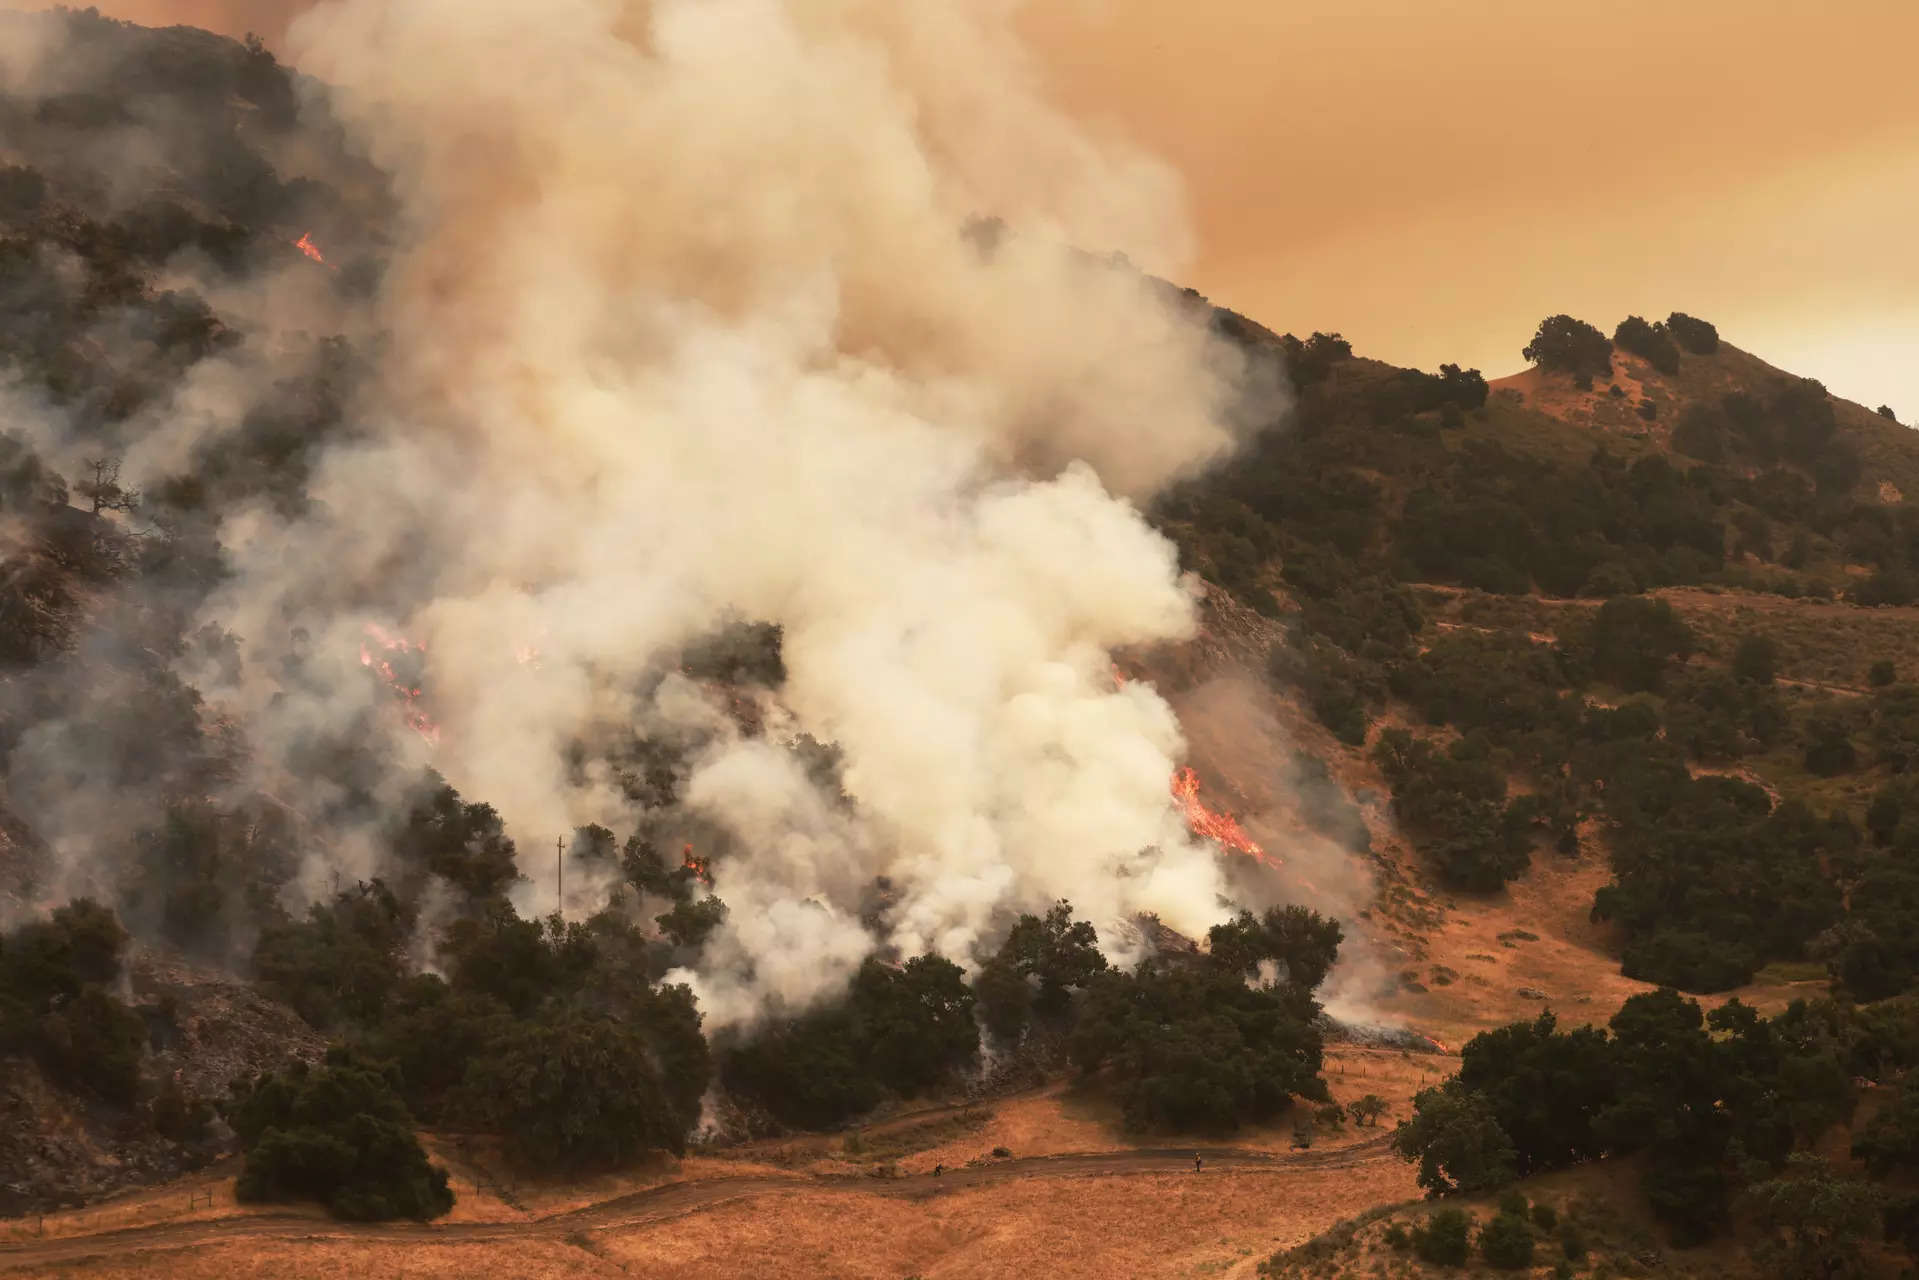 Michael Jackson's Neverland Ranch in Santa Barbara County comes under Wildfire threat 